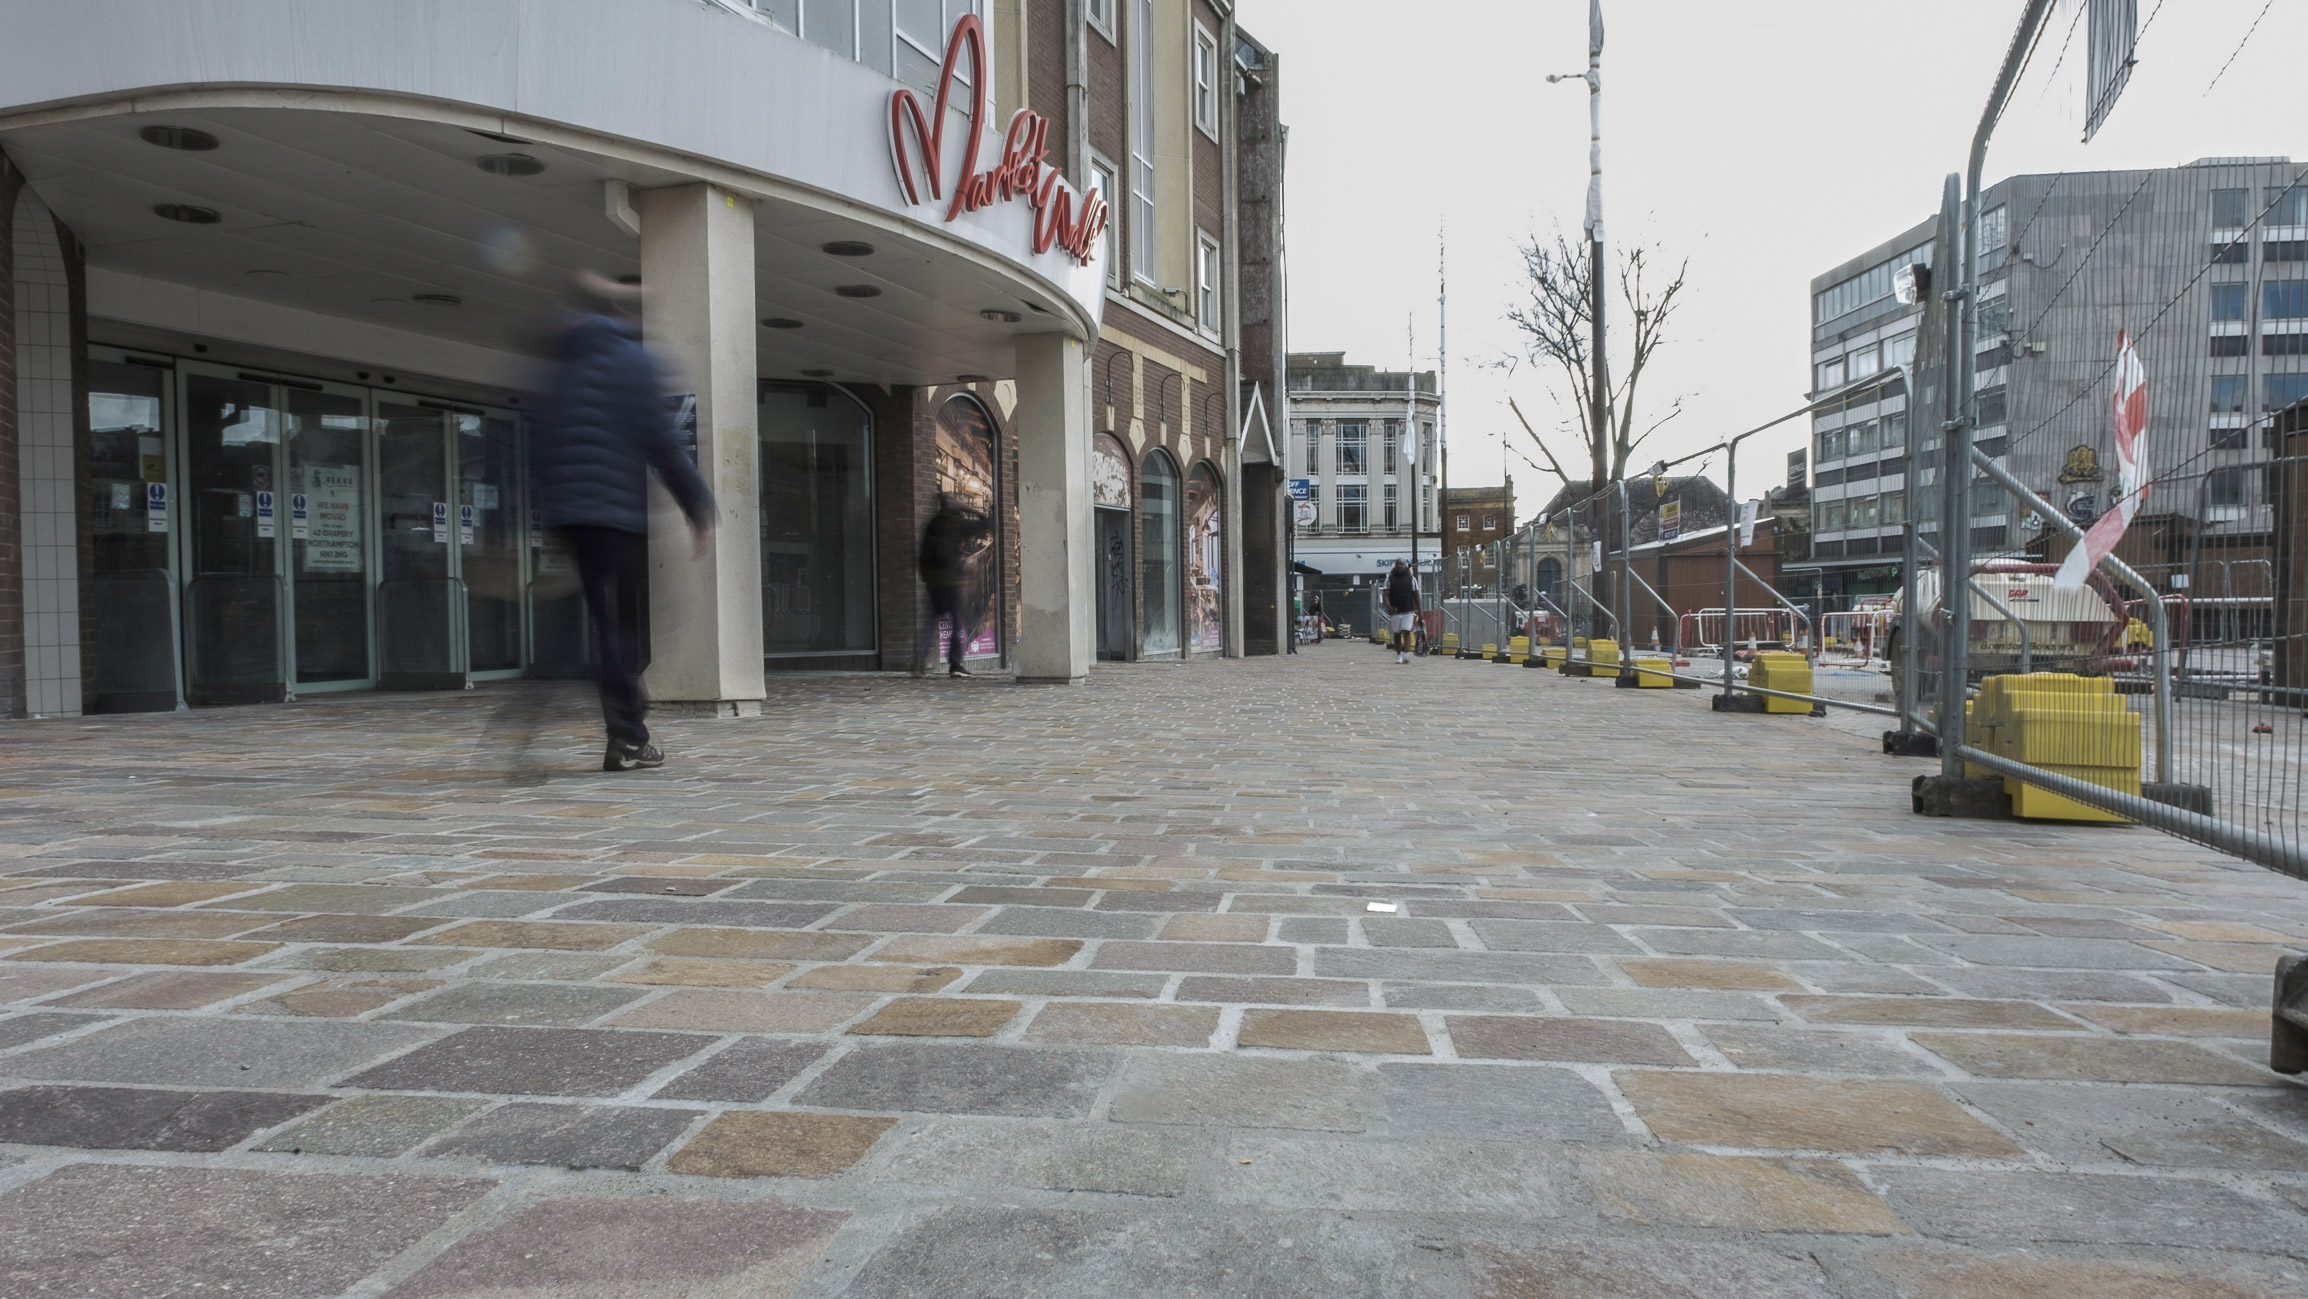 Newly opened paving on the Market Square that connects the Grosvenor centre with Abington Street